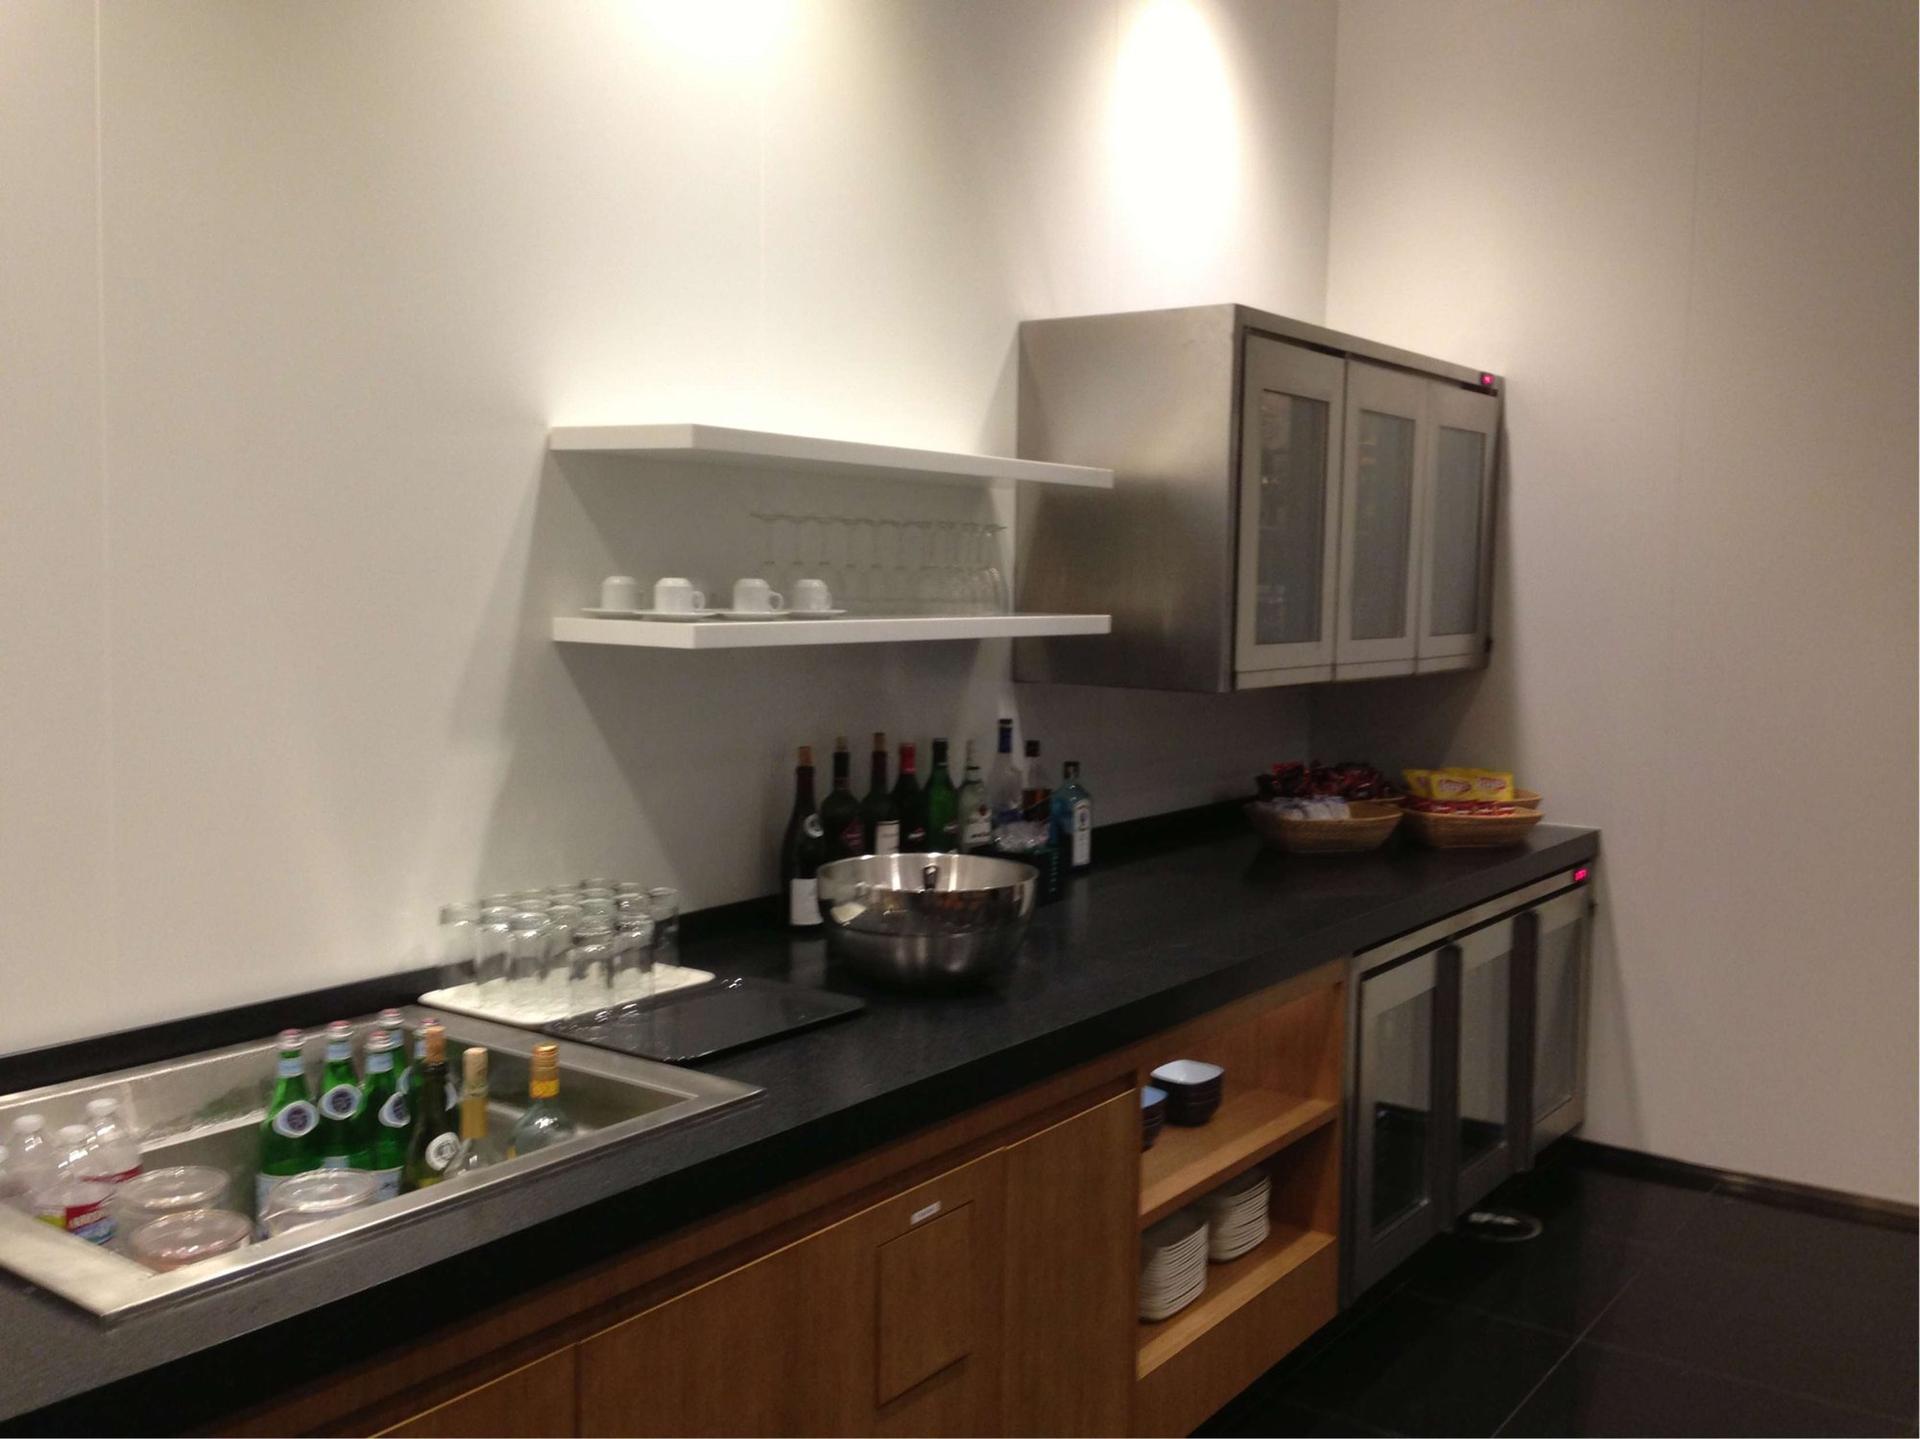 Cathay Pacific First and Business Class Lounge image 5 of 74